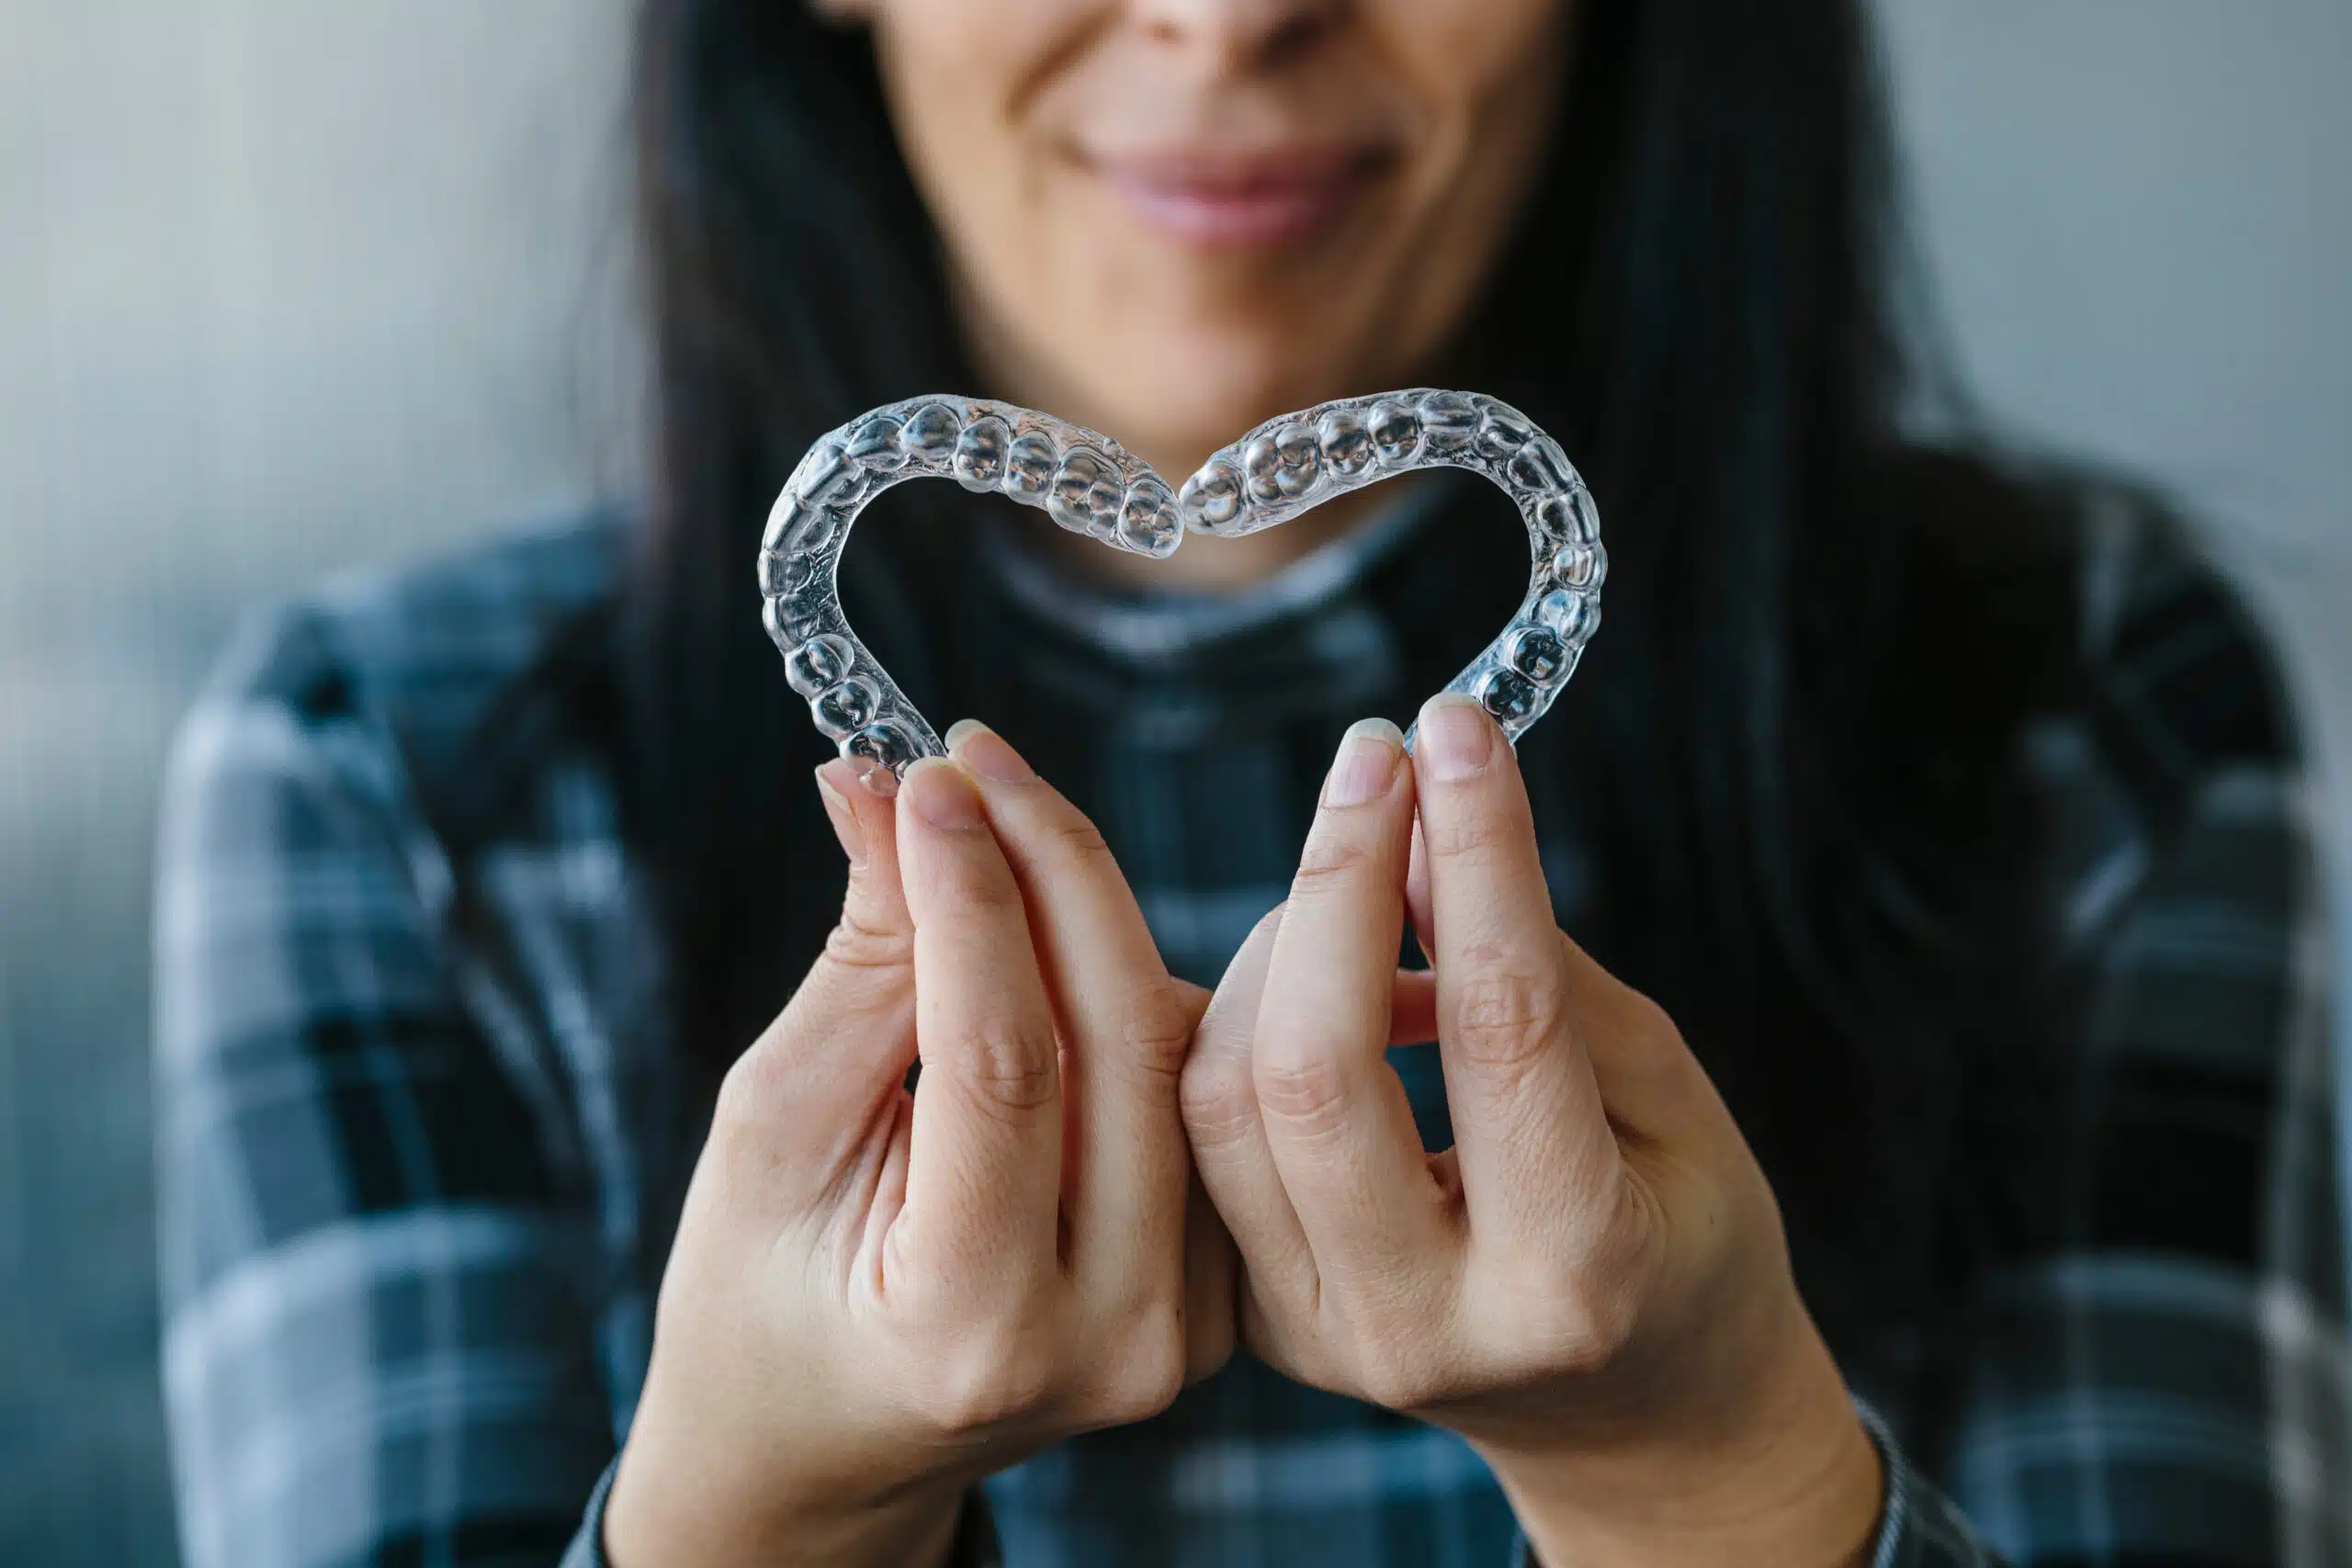 Invisalign is the clear, comfortable way to straighten your teeth, perfect for adults and teens alike.